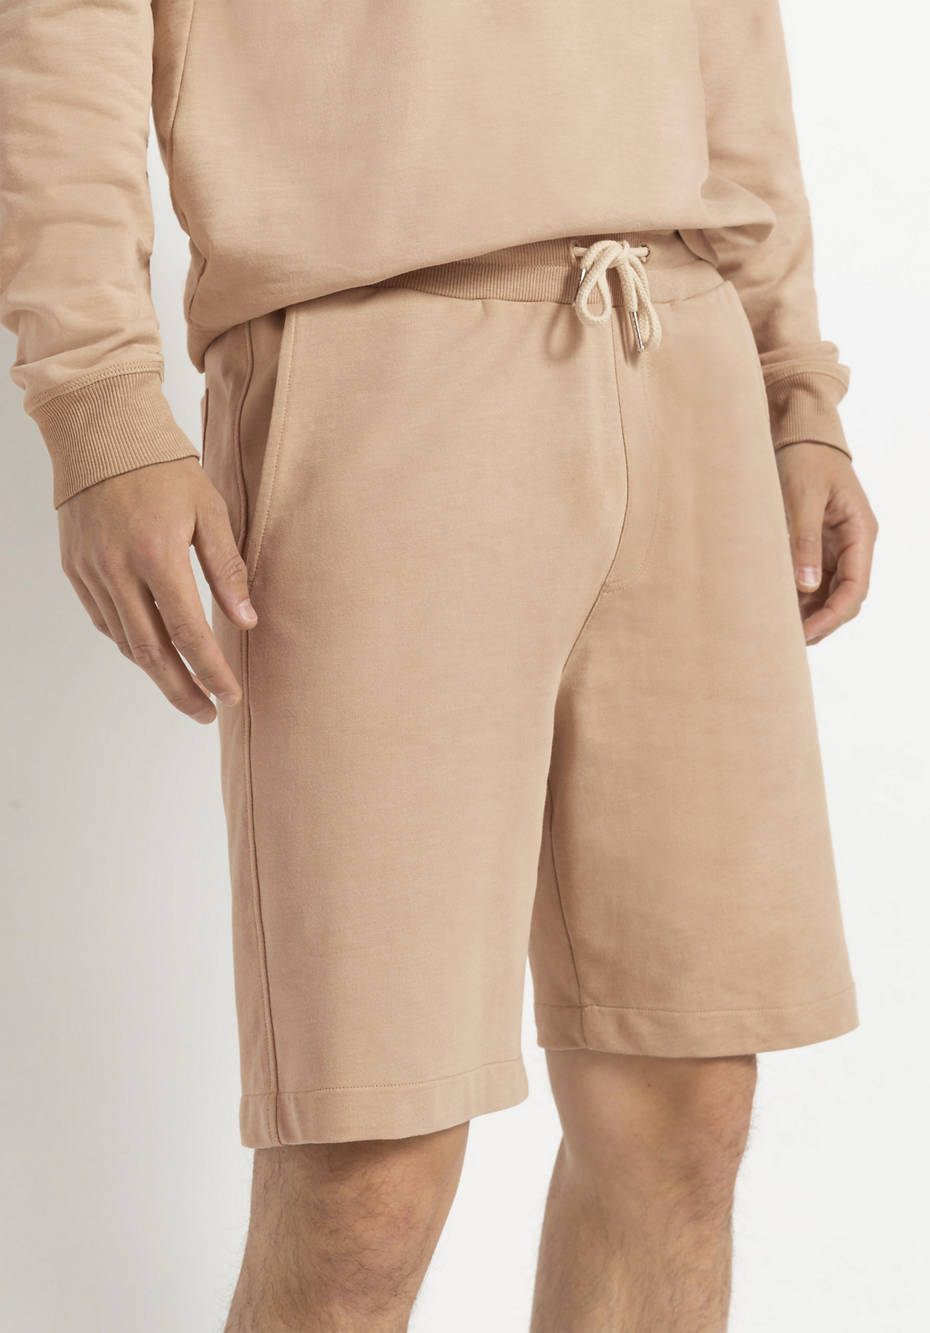 Plant-dyed sweat shorts made from organic cotton with kapok